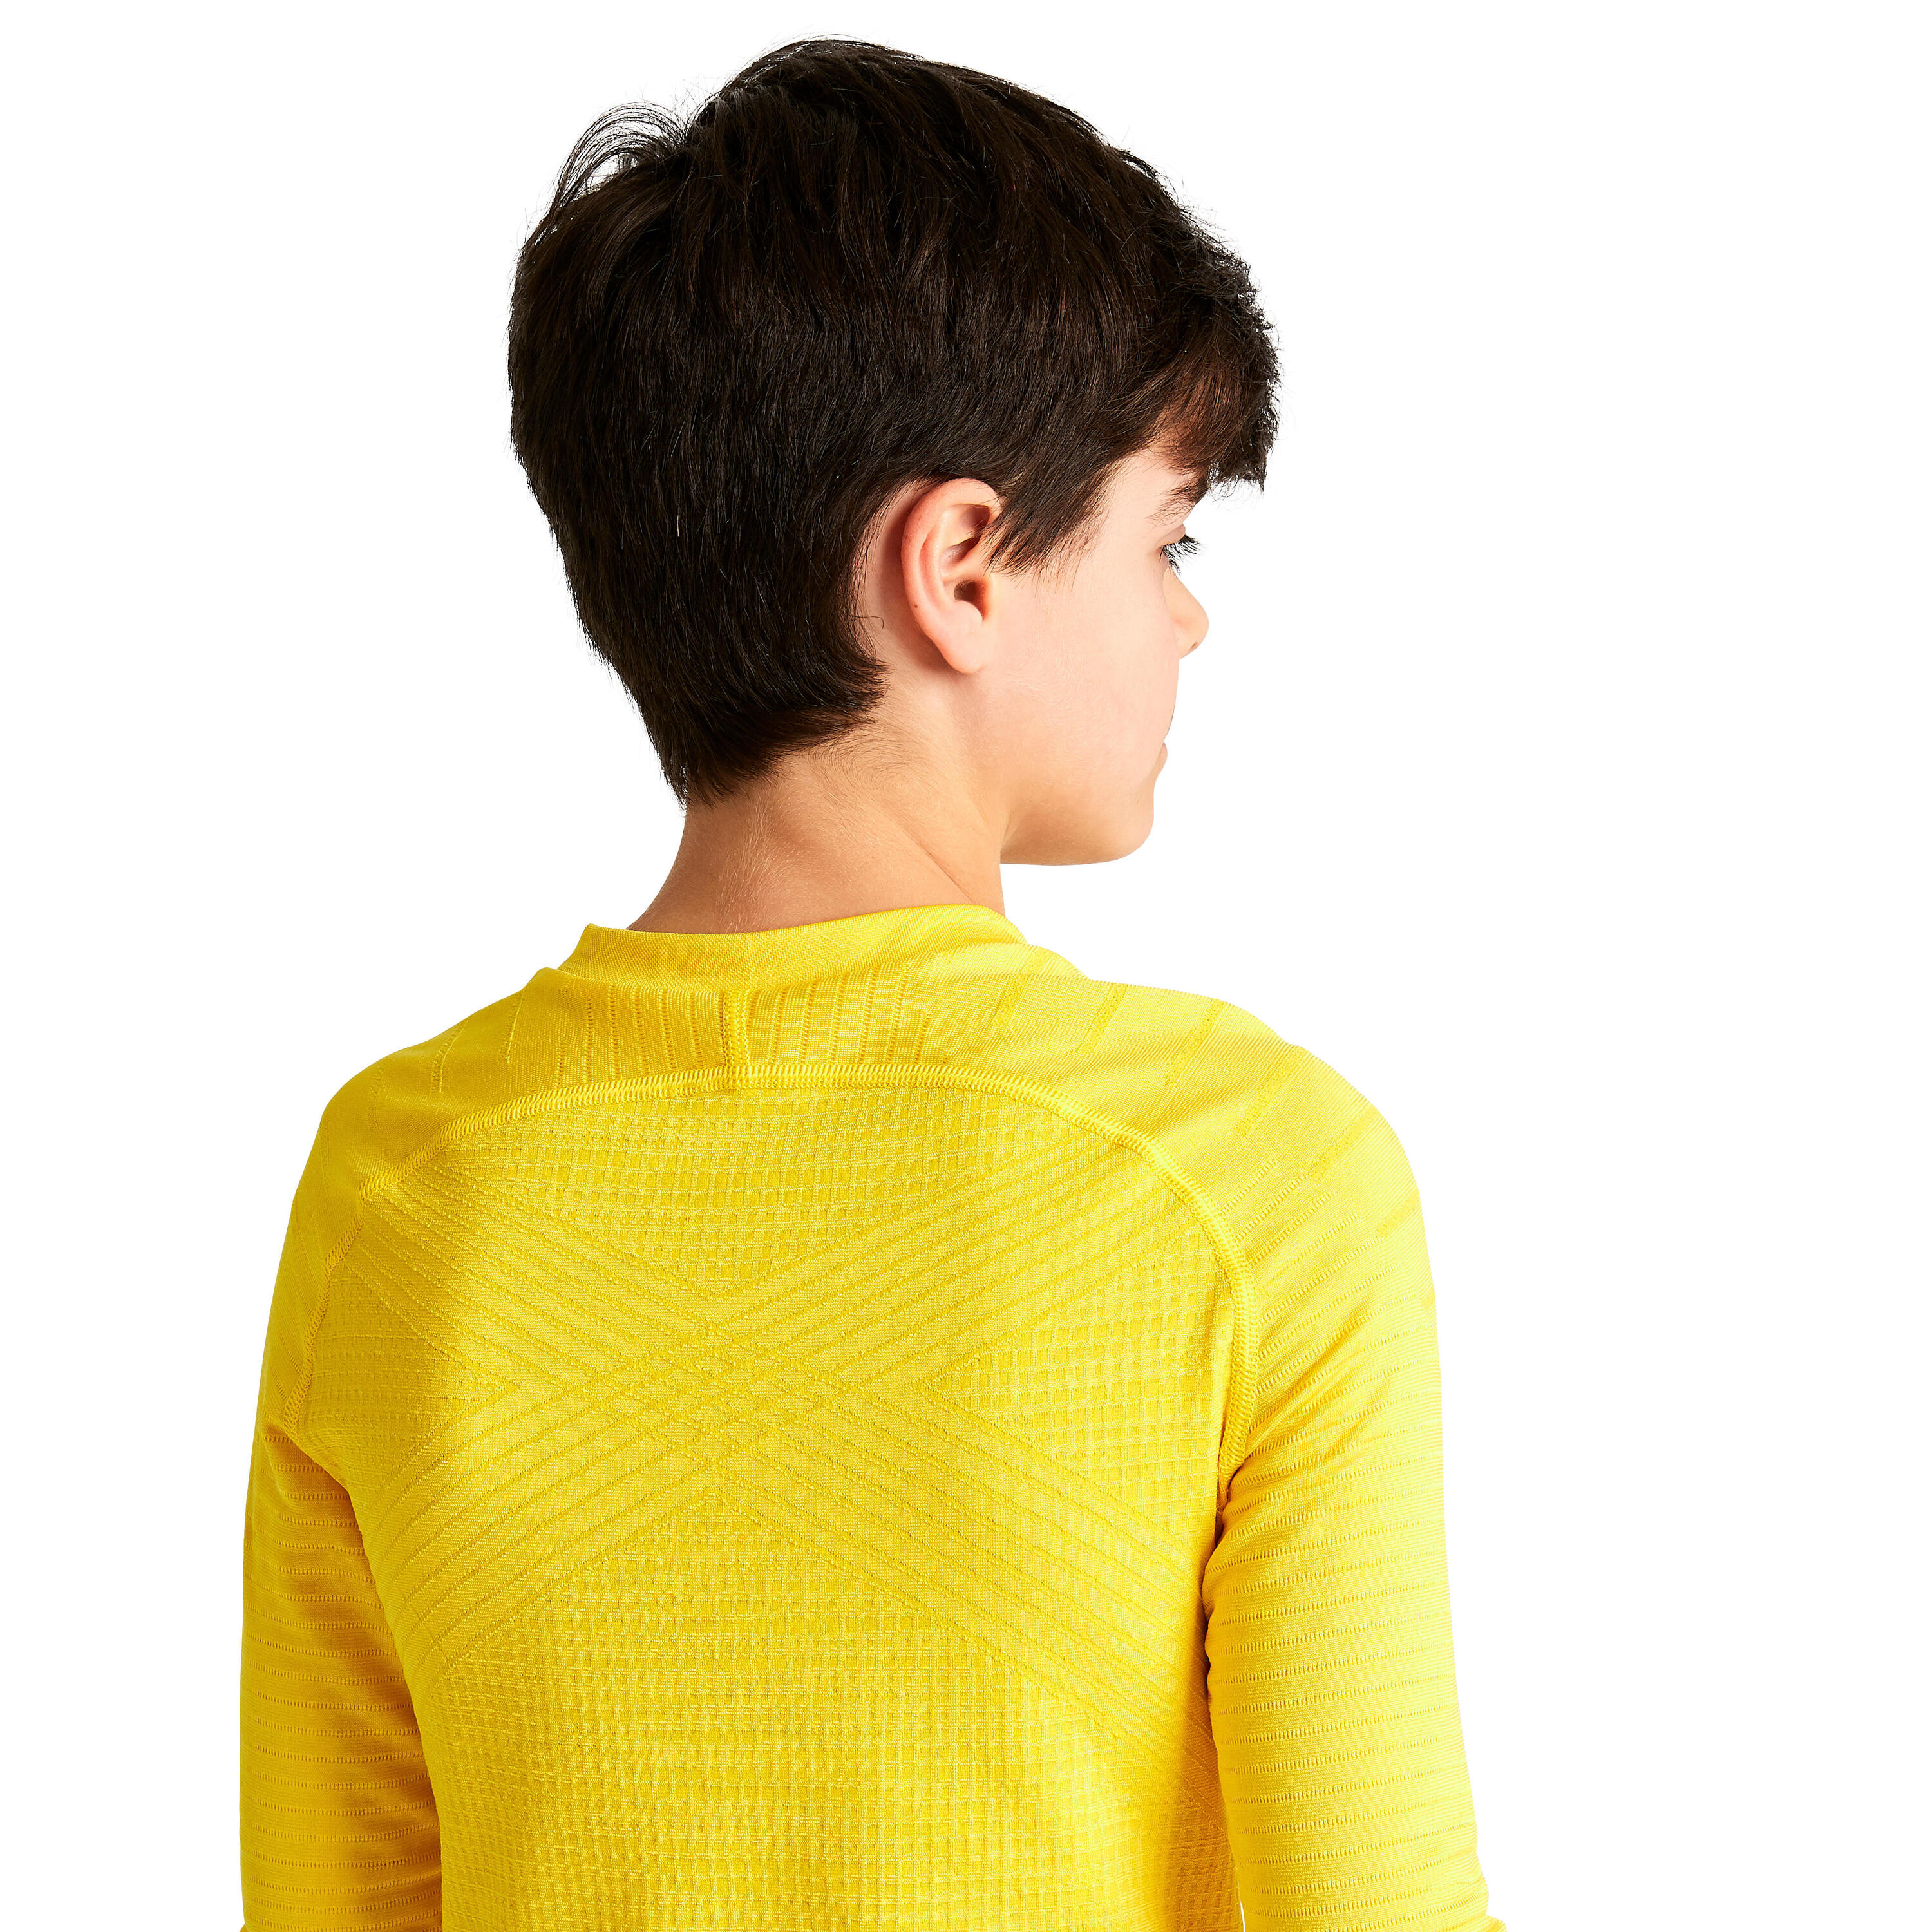 Kids' Long-Sleeved Thermal Base Layer Top Keepdry 500 - Yellow 8/9